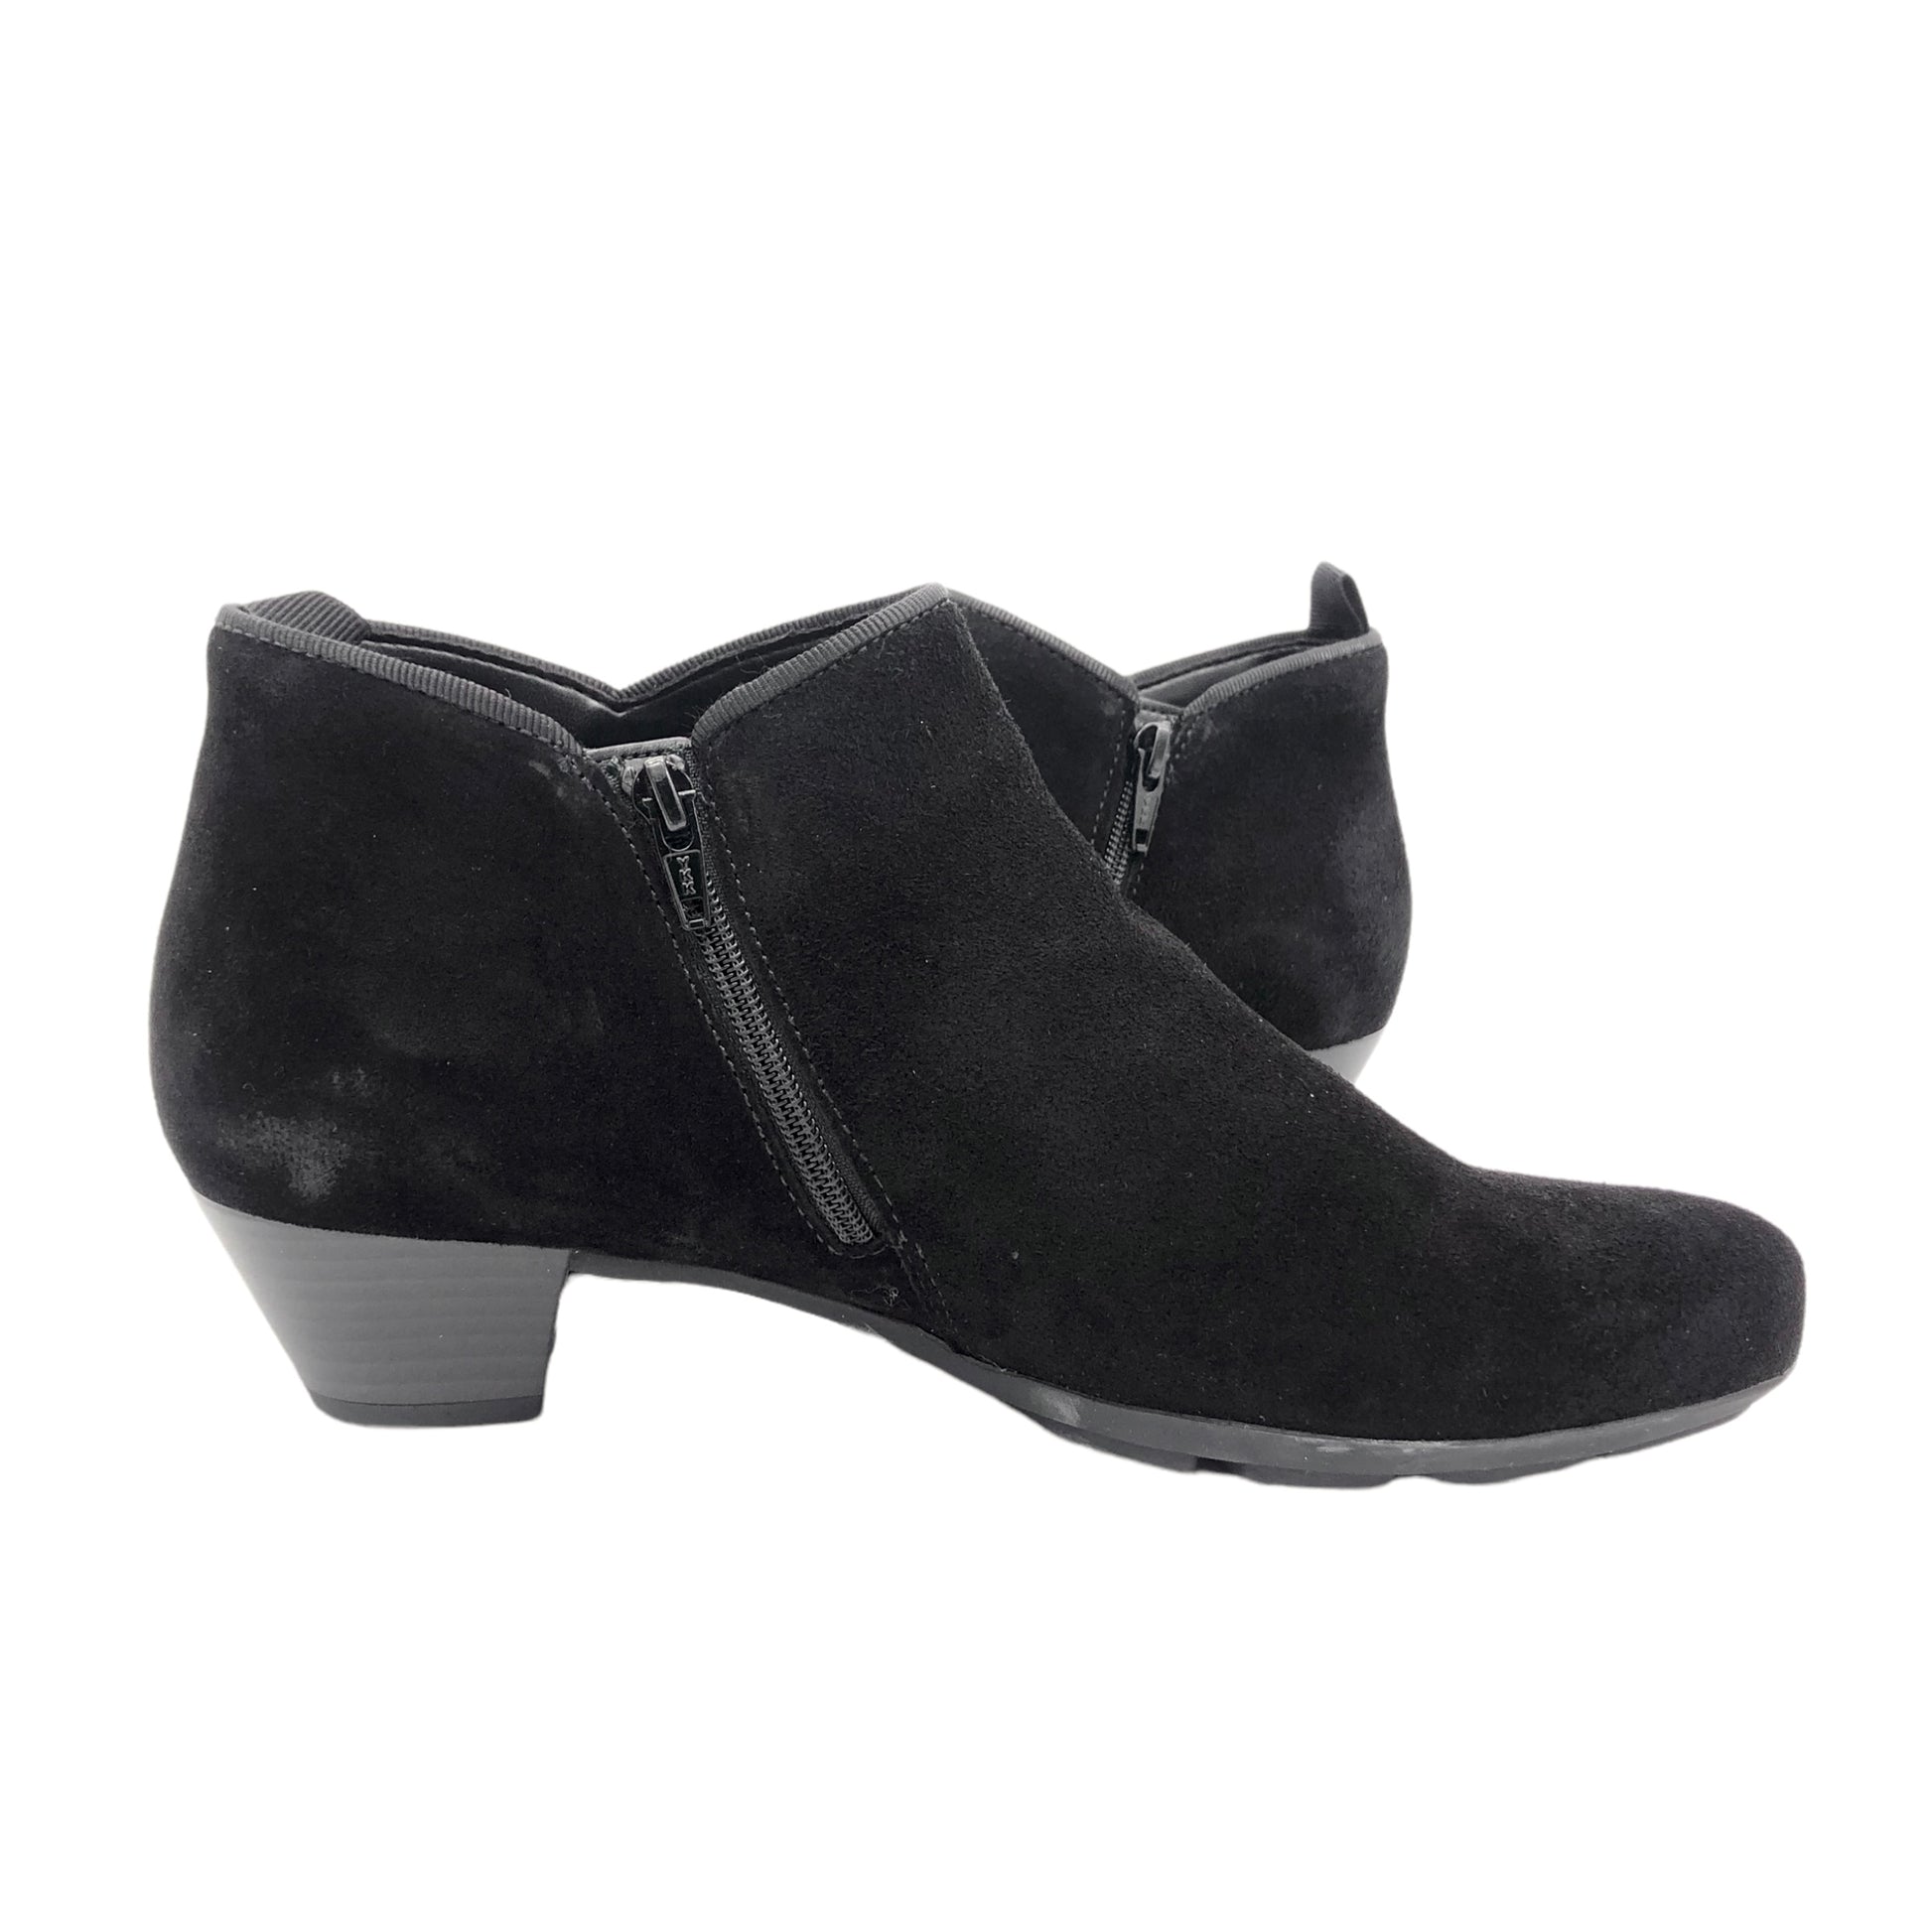 Gabor Trudy soft black suede leather booties dressy low heel ankle boots Arnouts Shoes